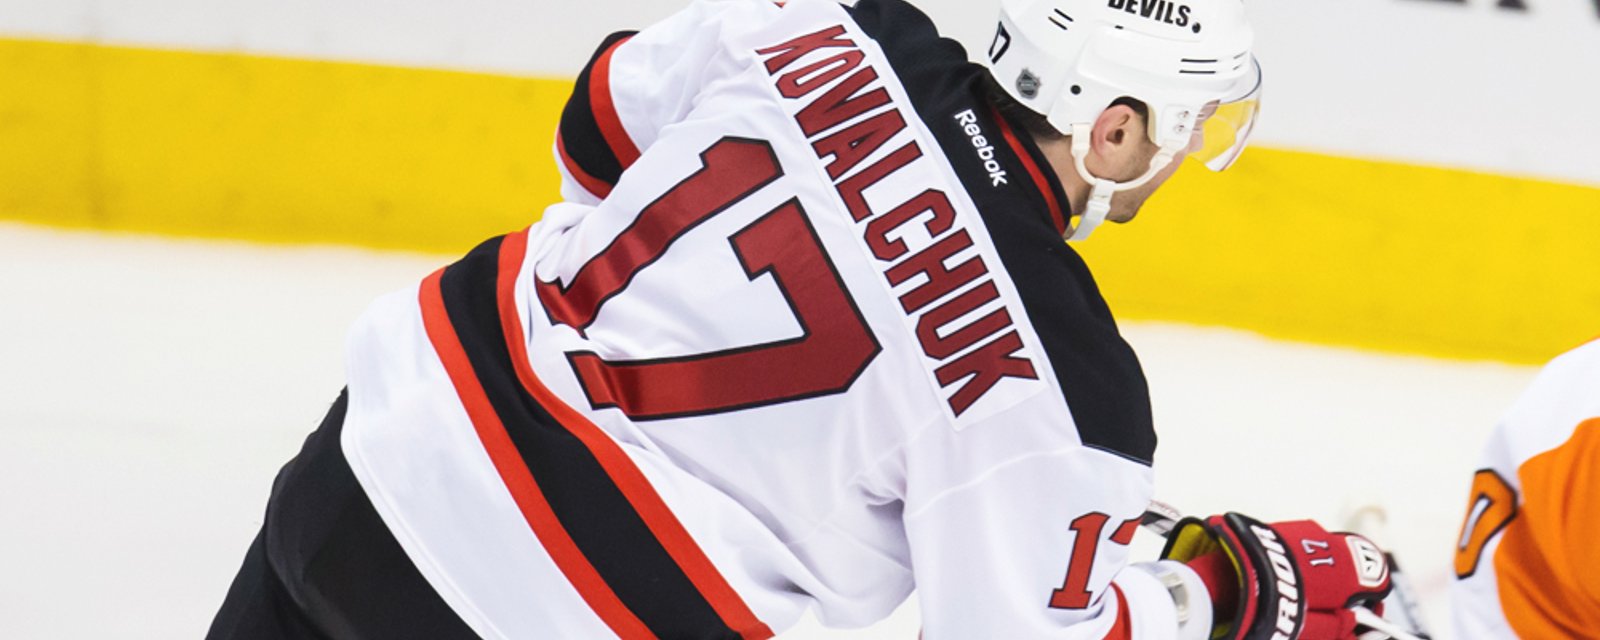 Breaking: One team reportedly making a final push on Ilya Kovalchuk today.